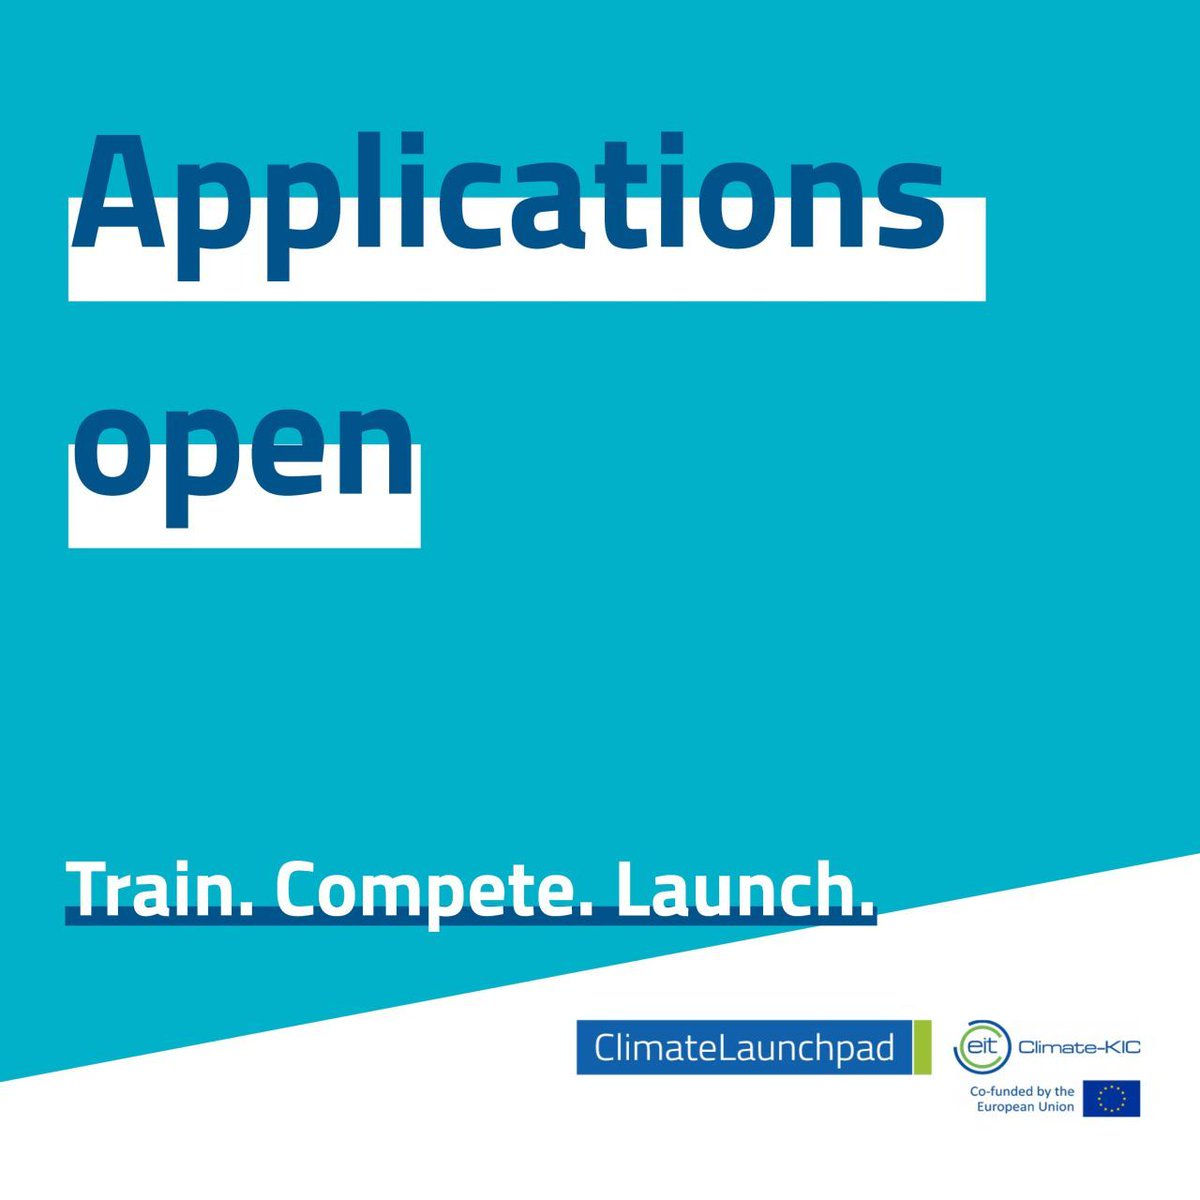 🌿🌟 Get ready to launch your green idea 🌟🌿 @ClimateLaunch, powered by EIT Climate-KIC, is open for applications! Get the training, compete with peers and conquer your spot on the (inter)national stage! 🌍 Sign up at climatelaunchpad.org